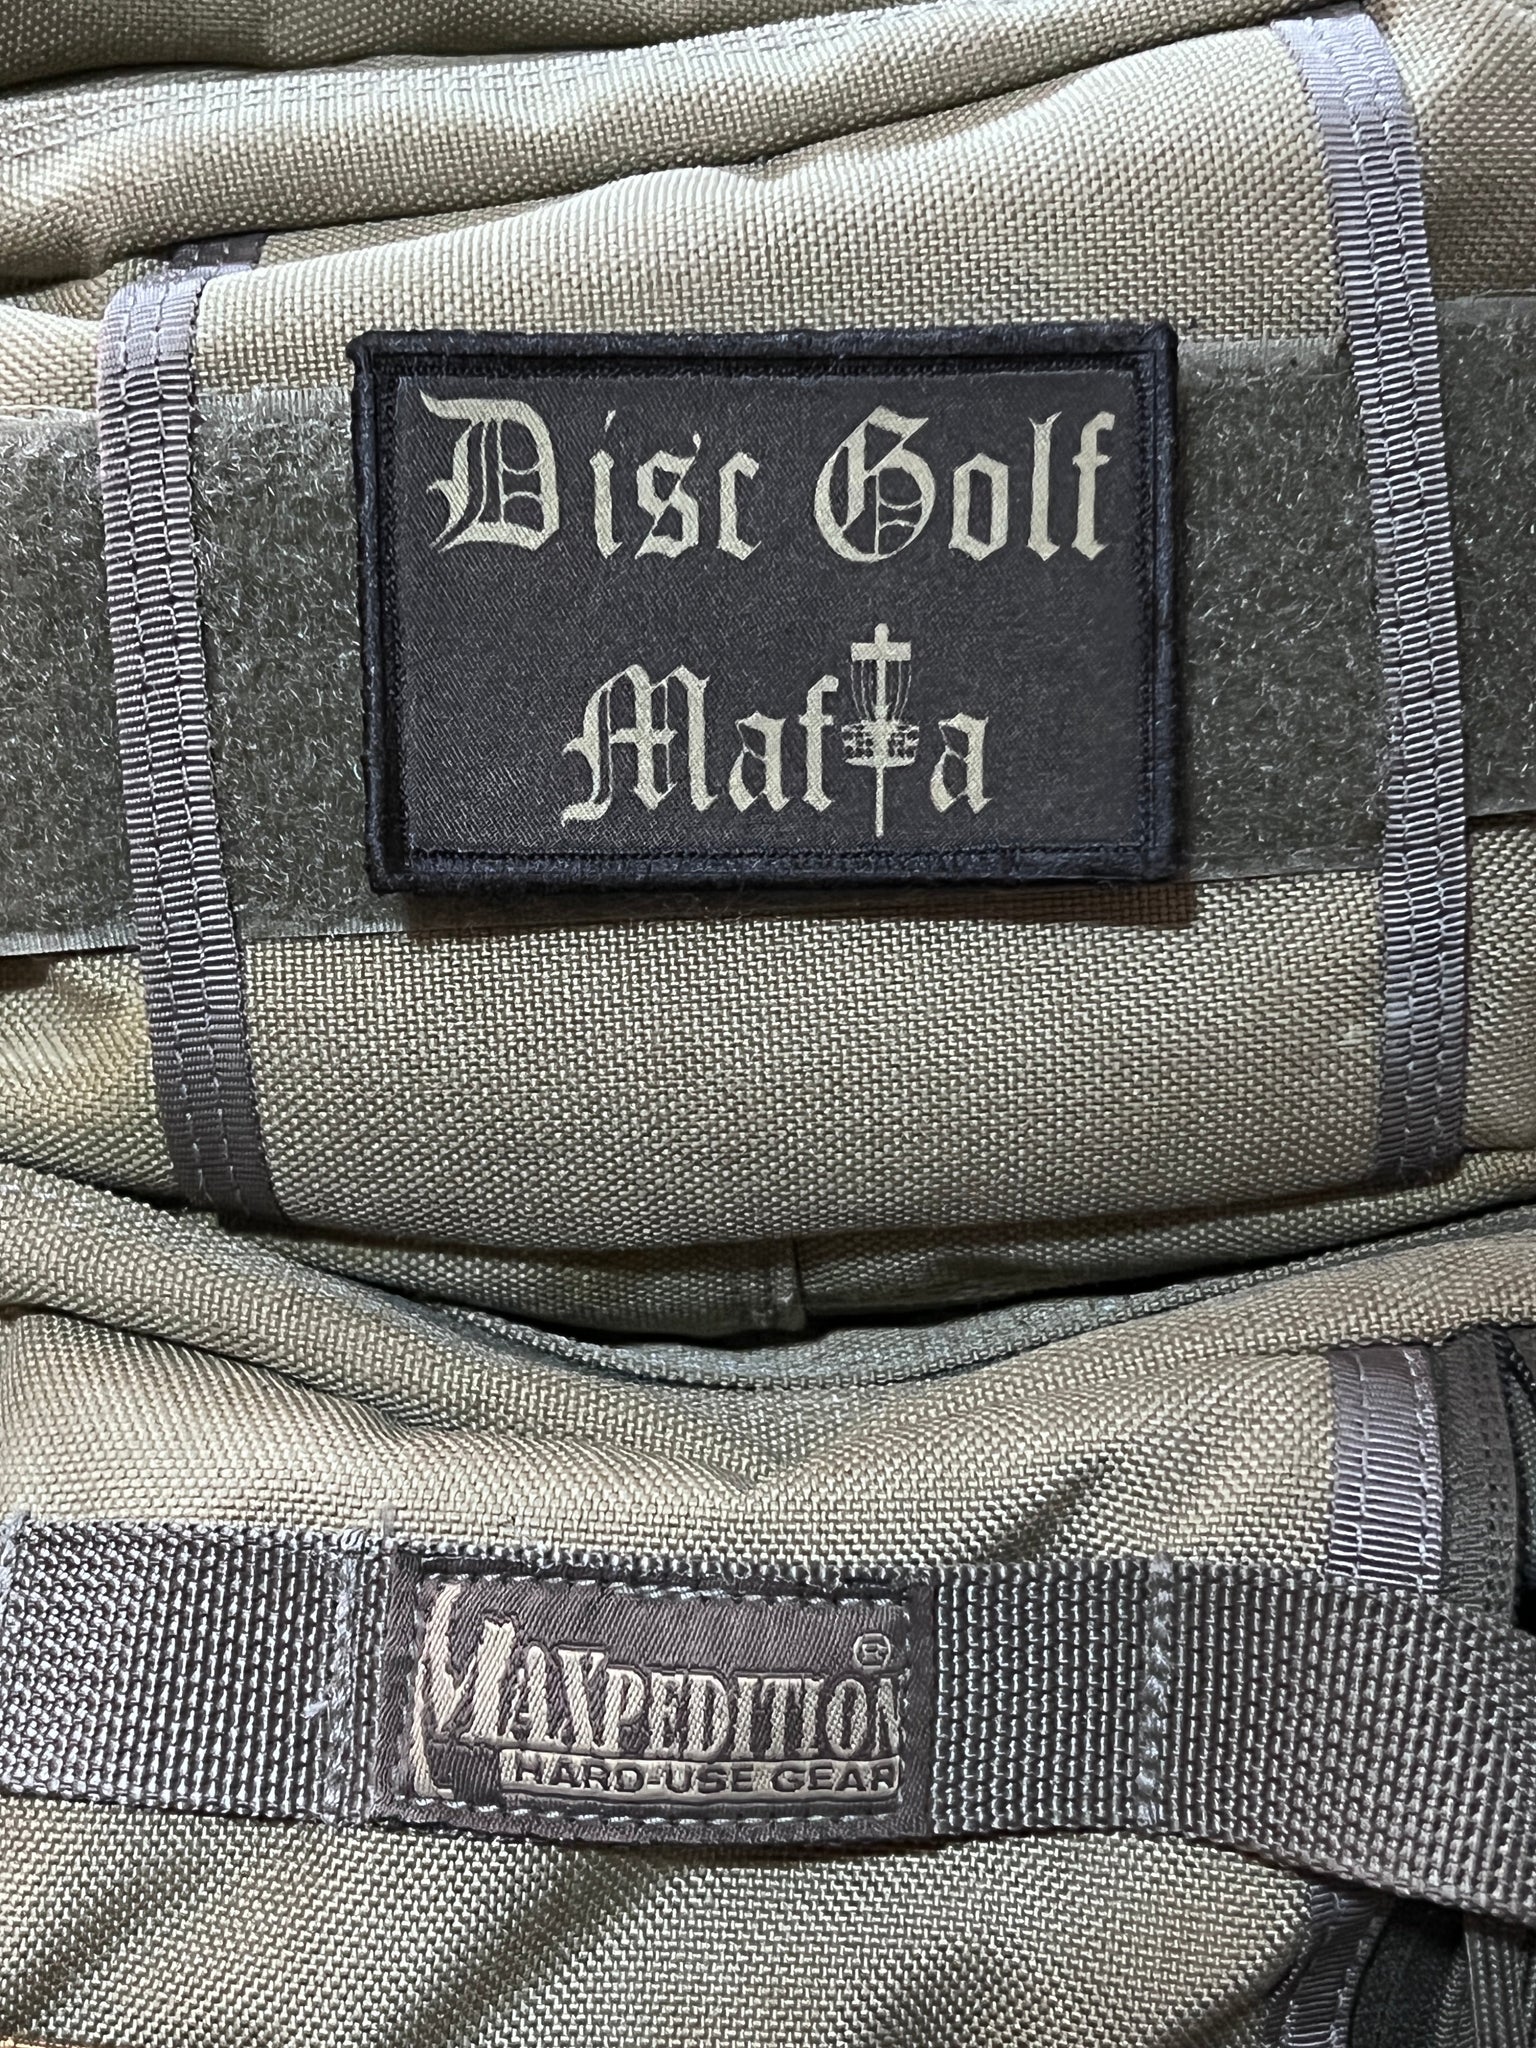 Disc Golf Mafia Morale Patch Morale Patches Redheaded T Shirts 